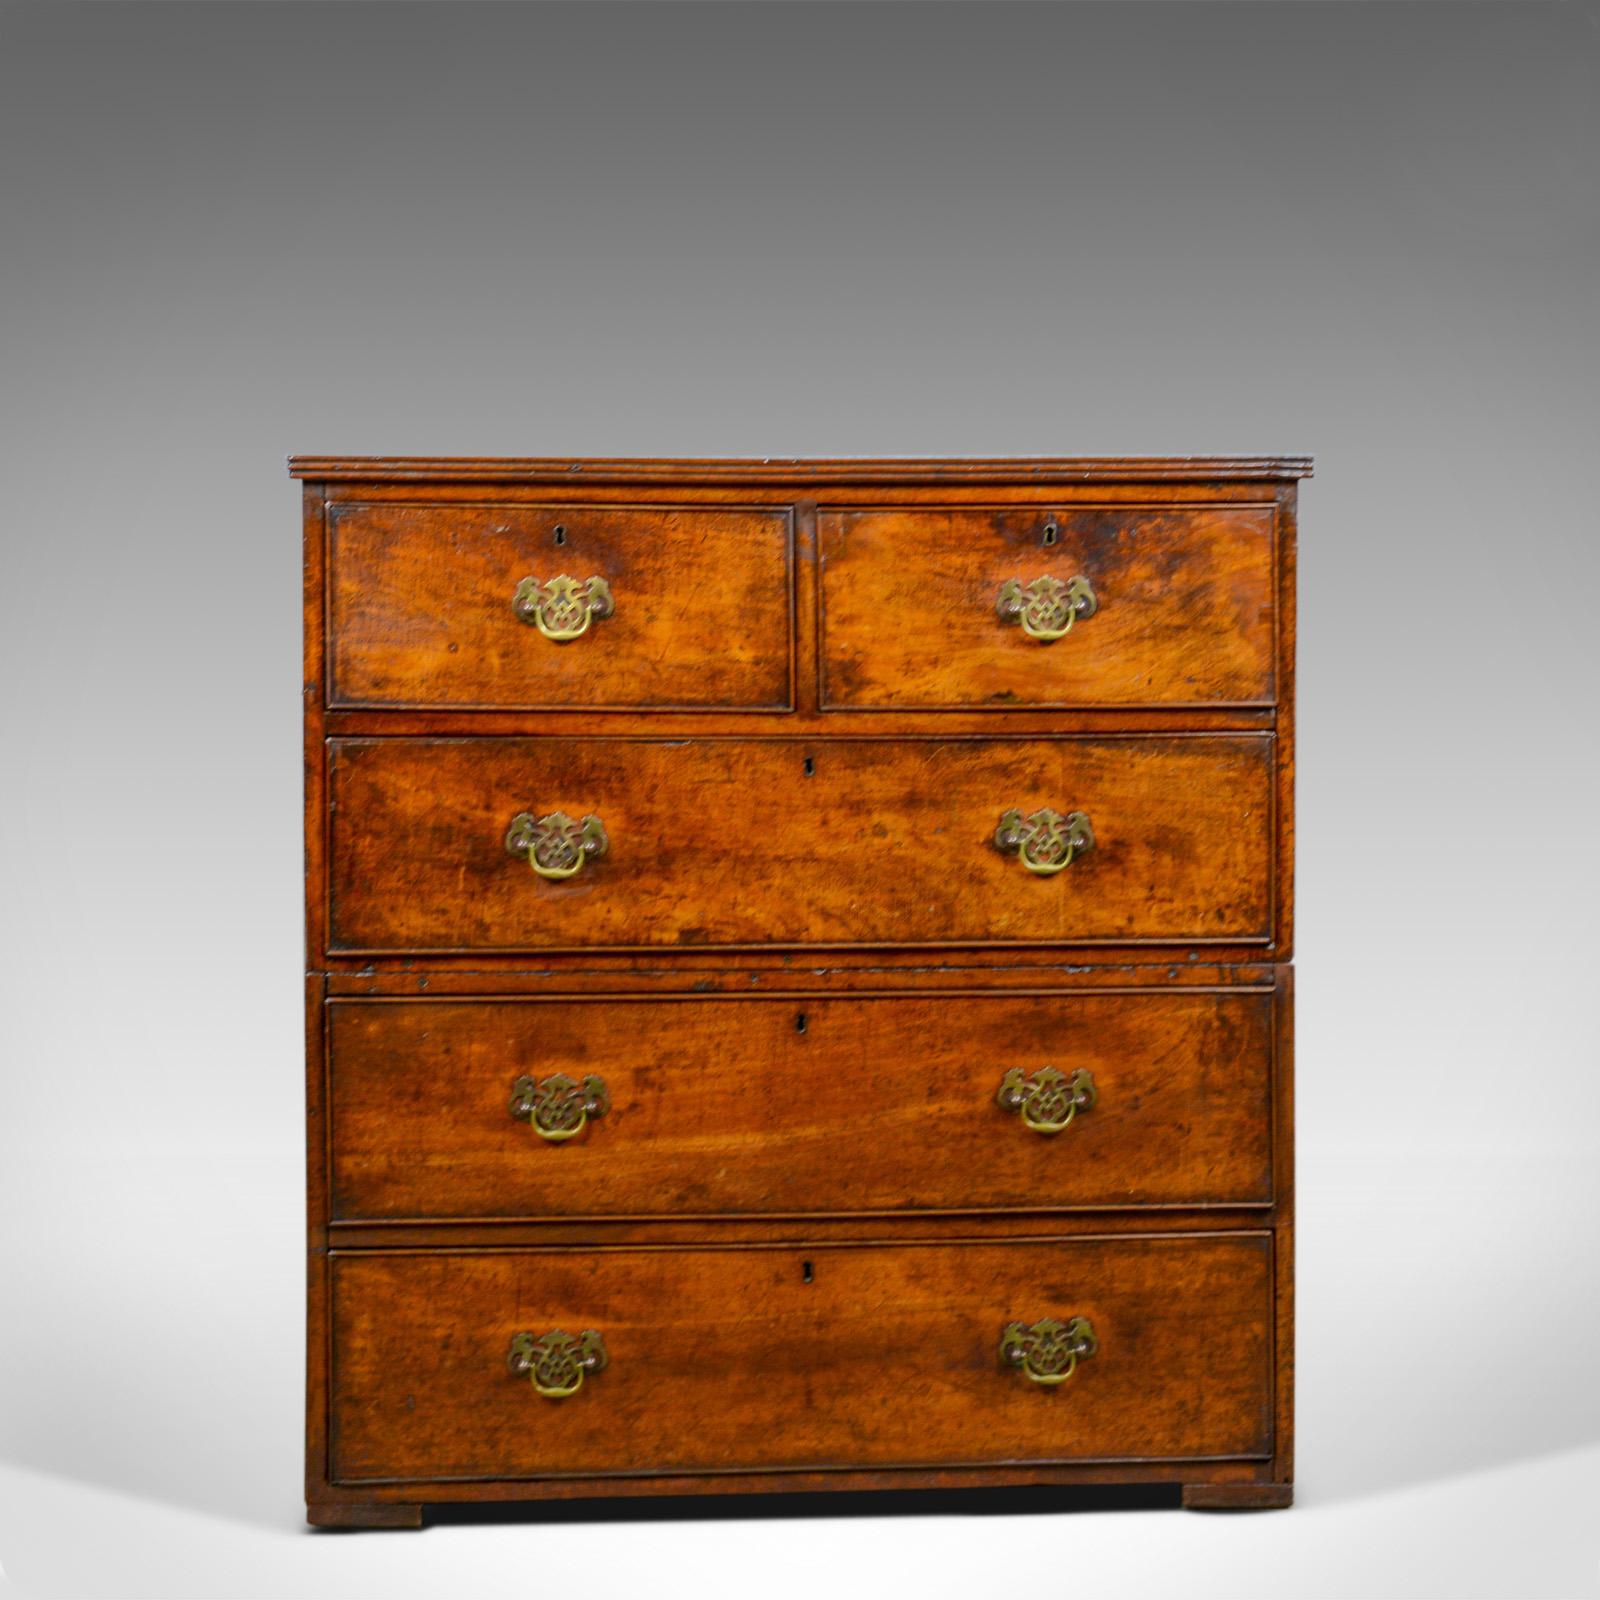 This is an antique Campaign chest of drawers. An English, late Georgian, walnut, narrow chest dating to the late 18th century, circa 1780.

A charming example of a Georgian Campaign chest
Warm hues to the aged walnut in a wax polished